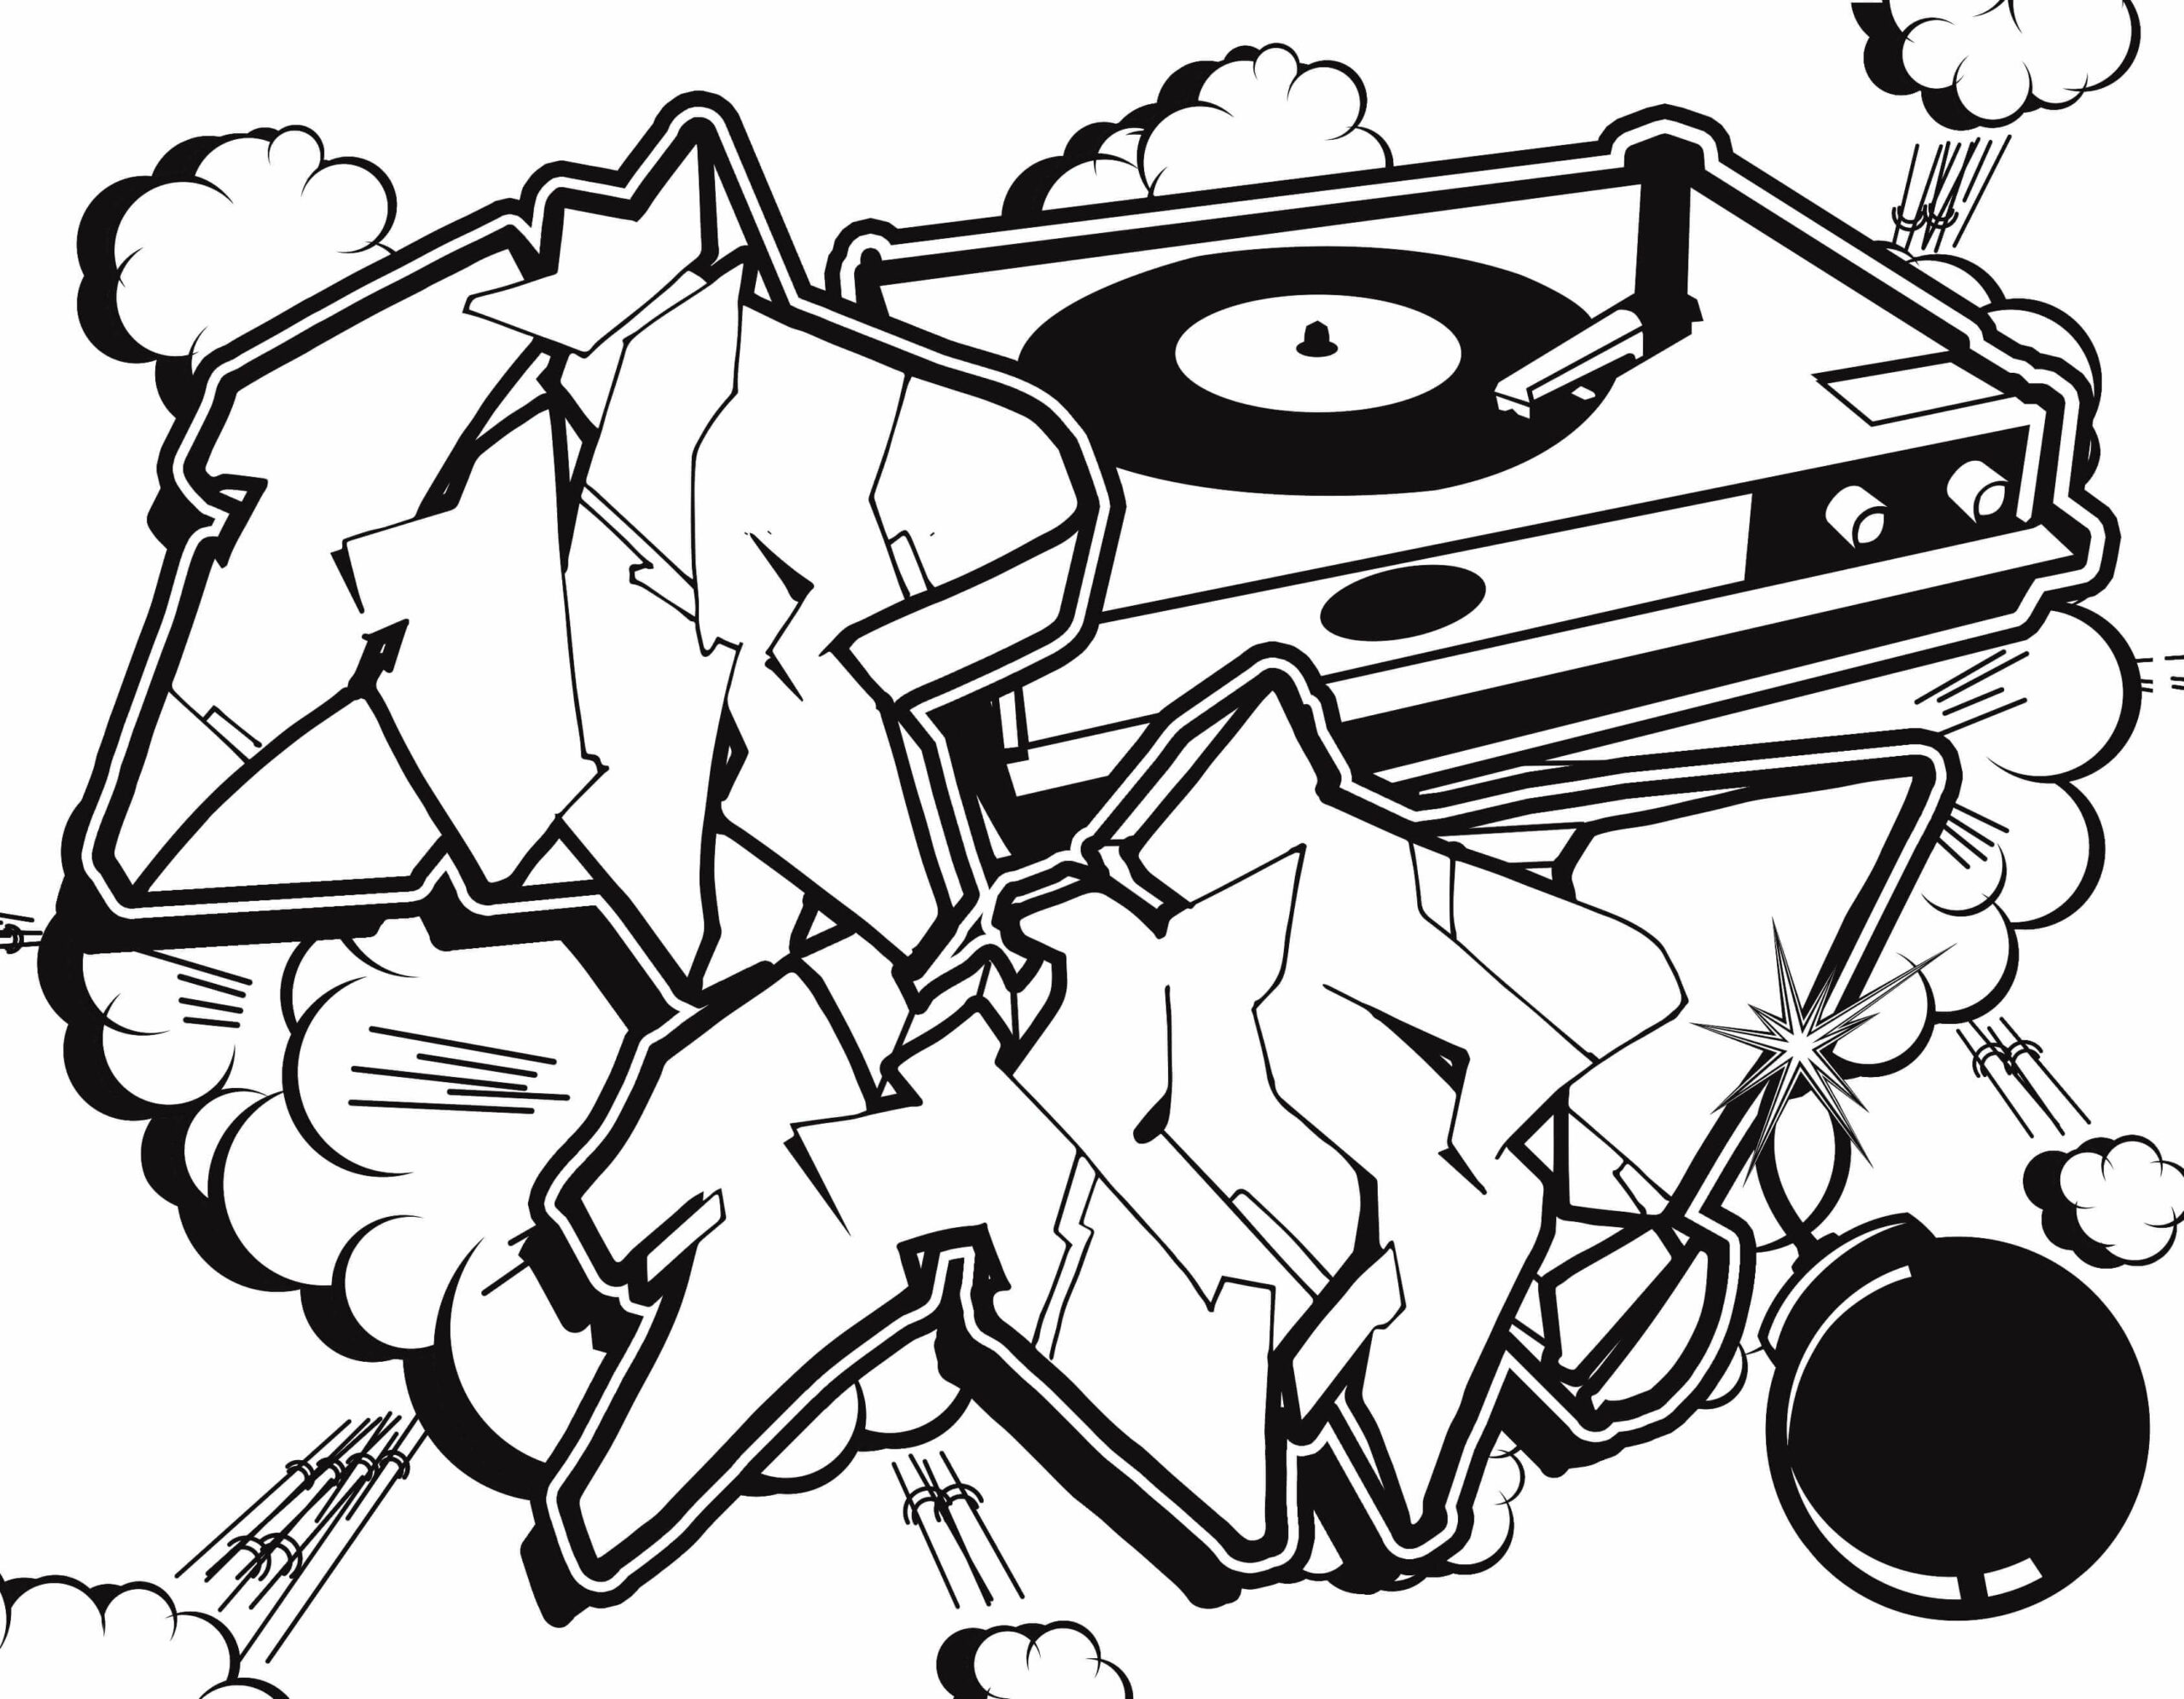 Interesting graffiti with music player coloring page